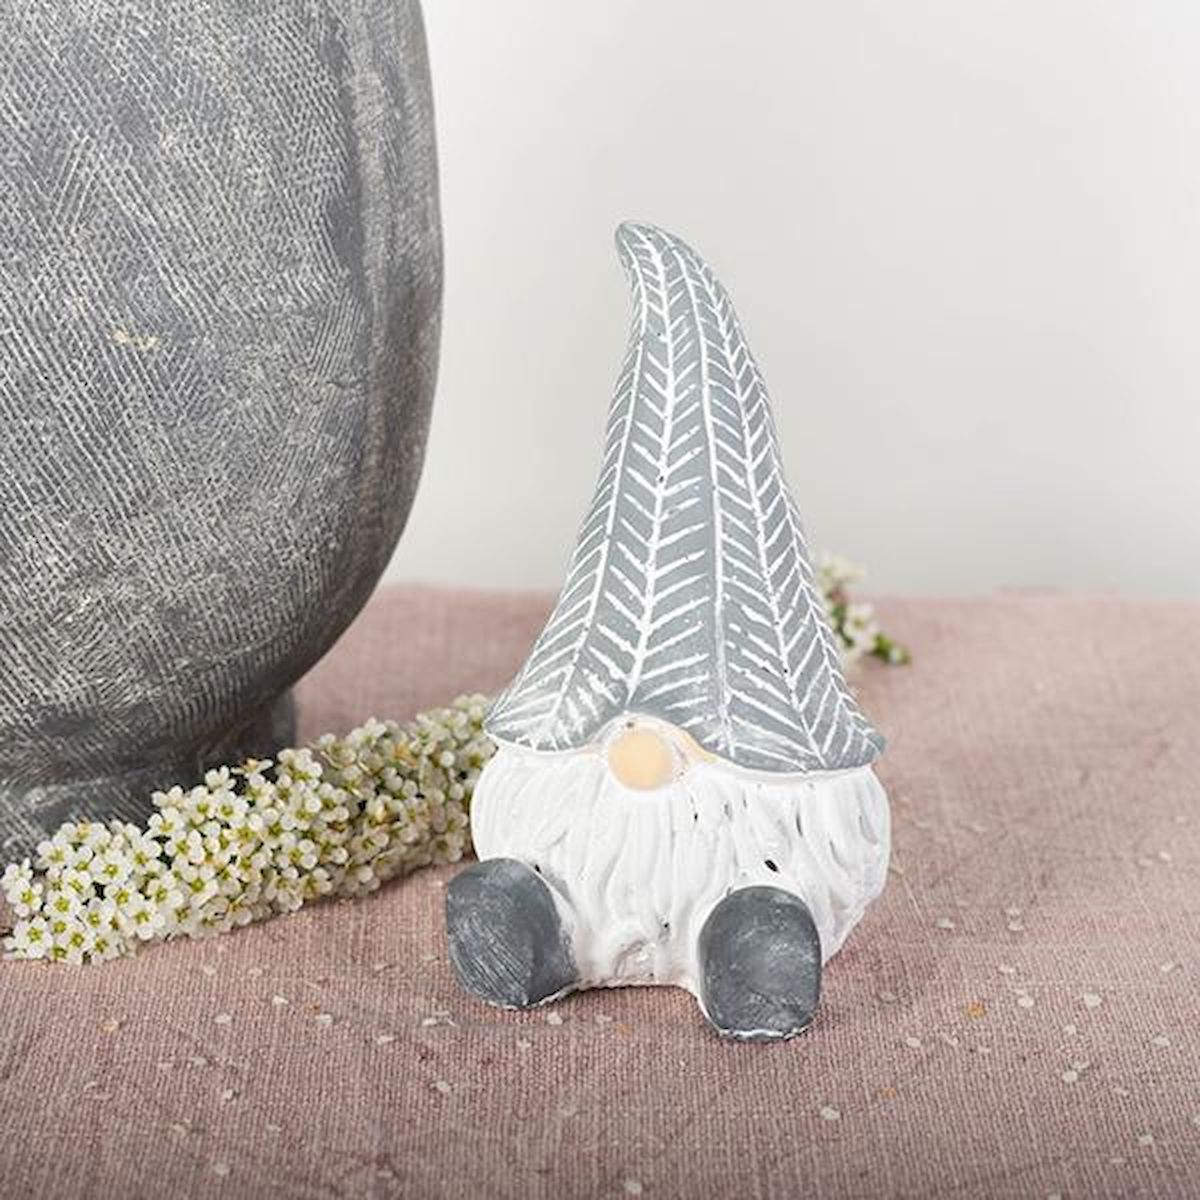 Picture of Forpost FP-CNP-174-GR-S Gray & White Cement Gnome Figurine